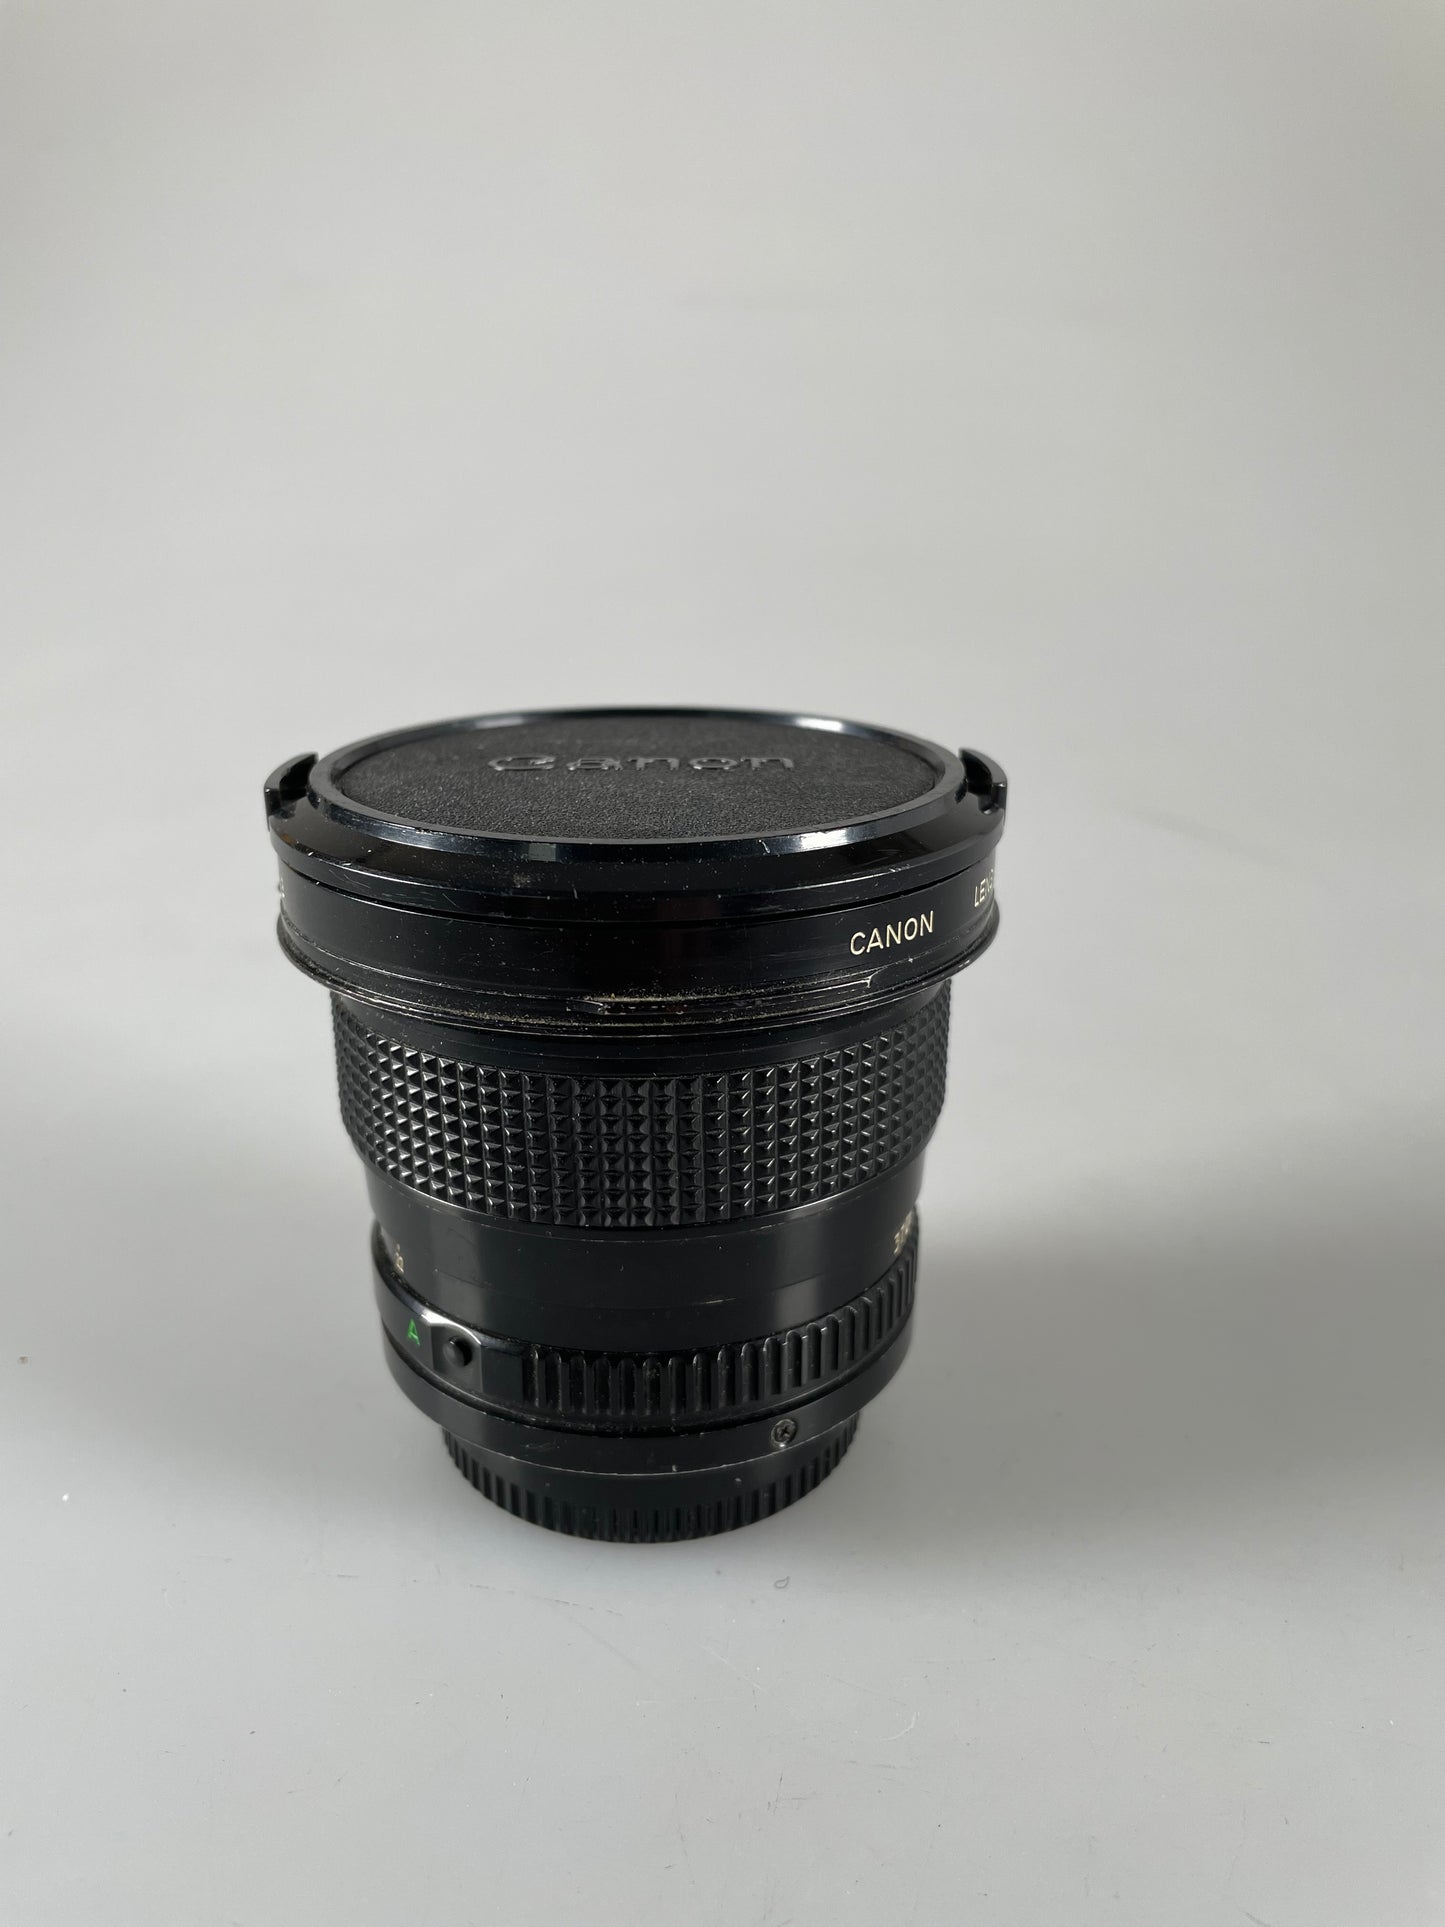 Canon New FD NFD 20mm f2.8 MF Wide Angle Lens